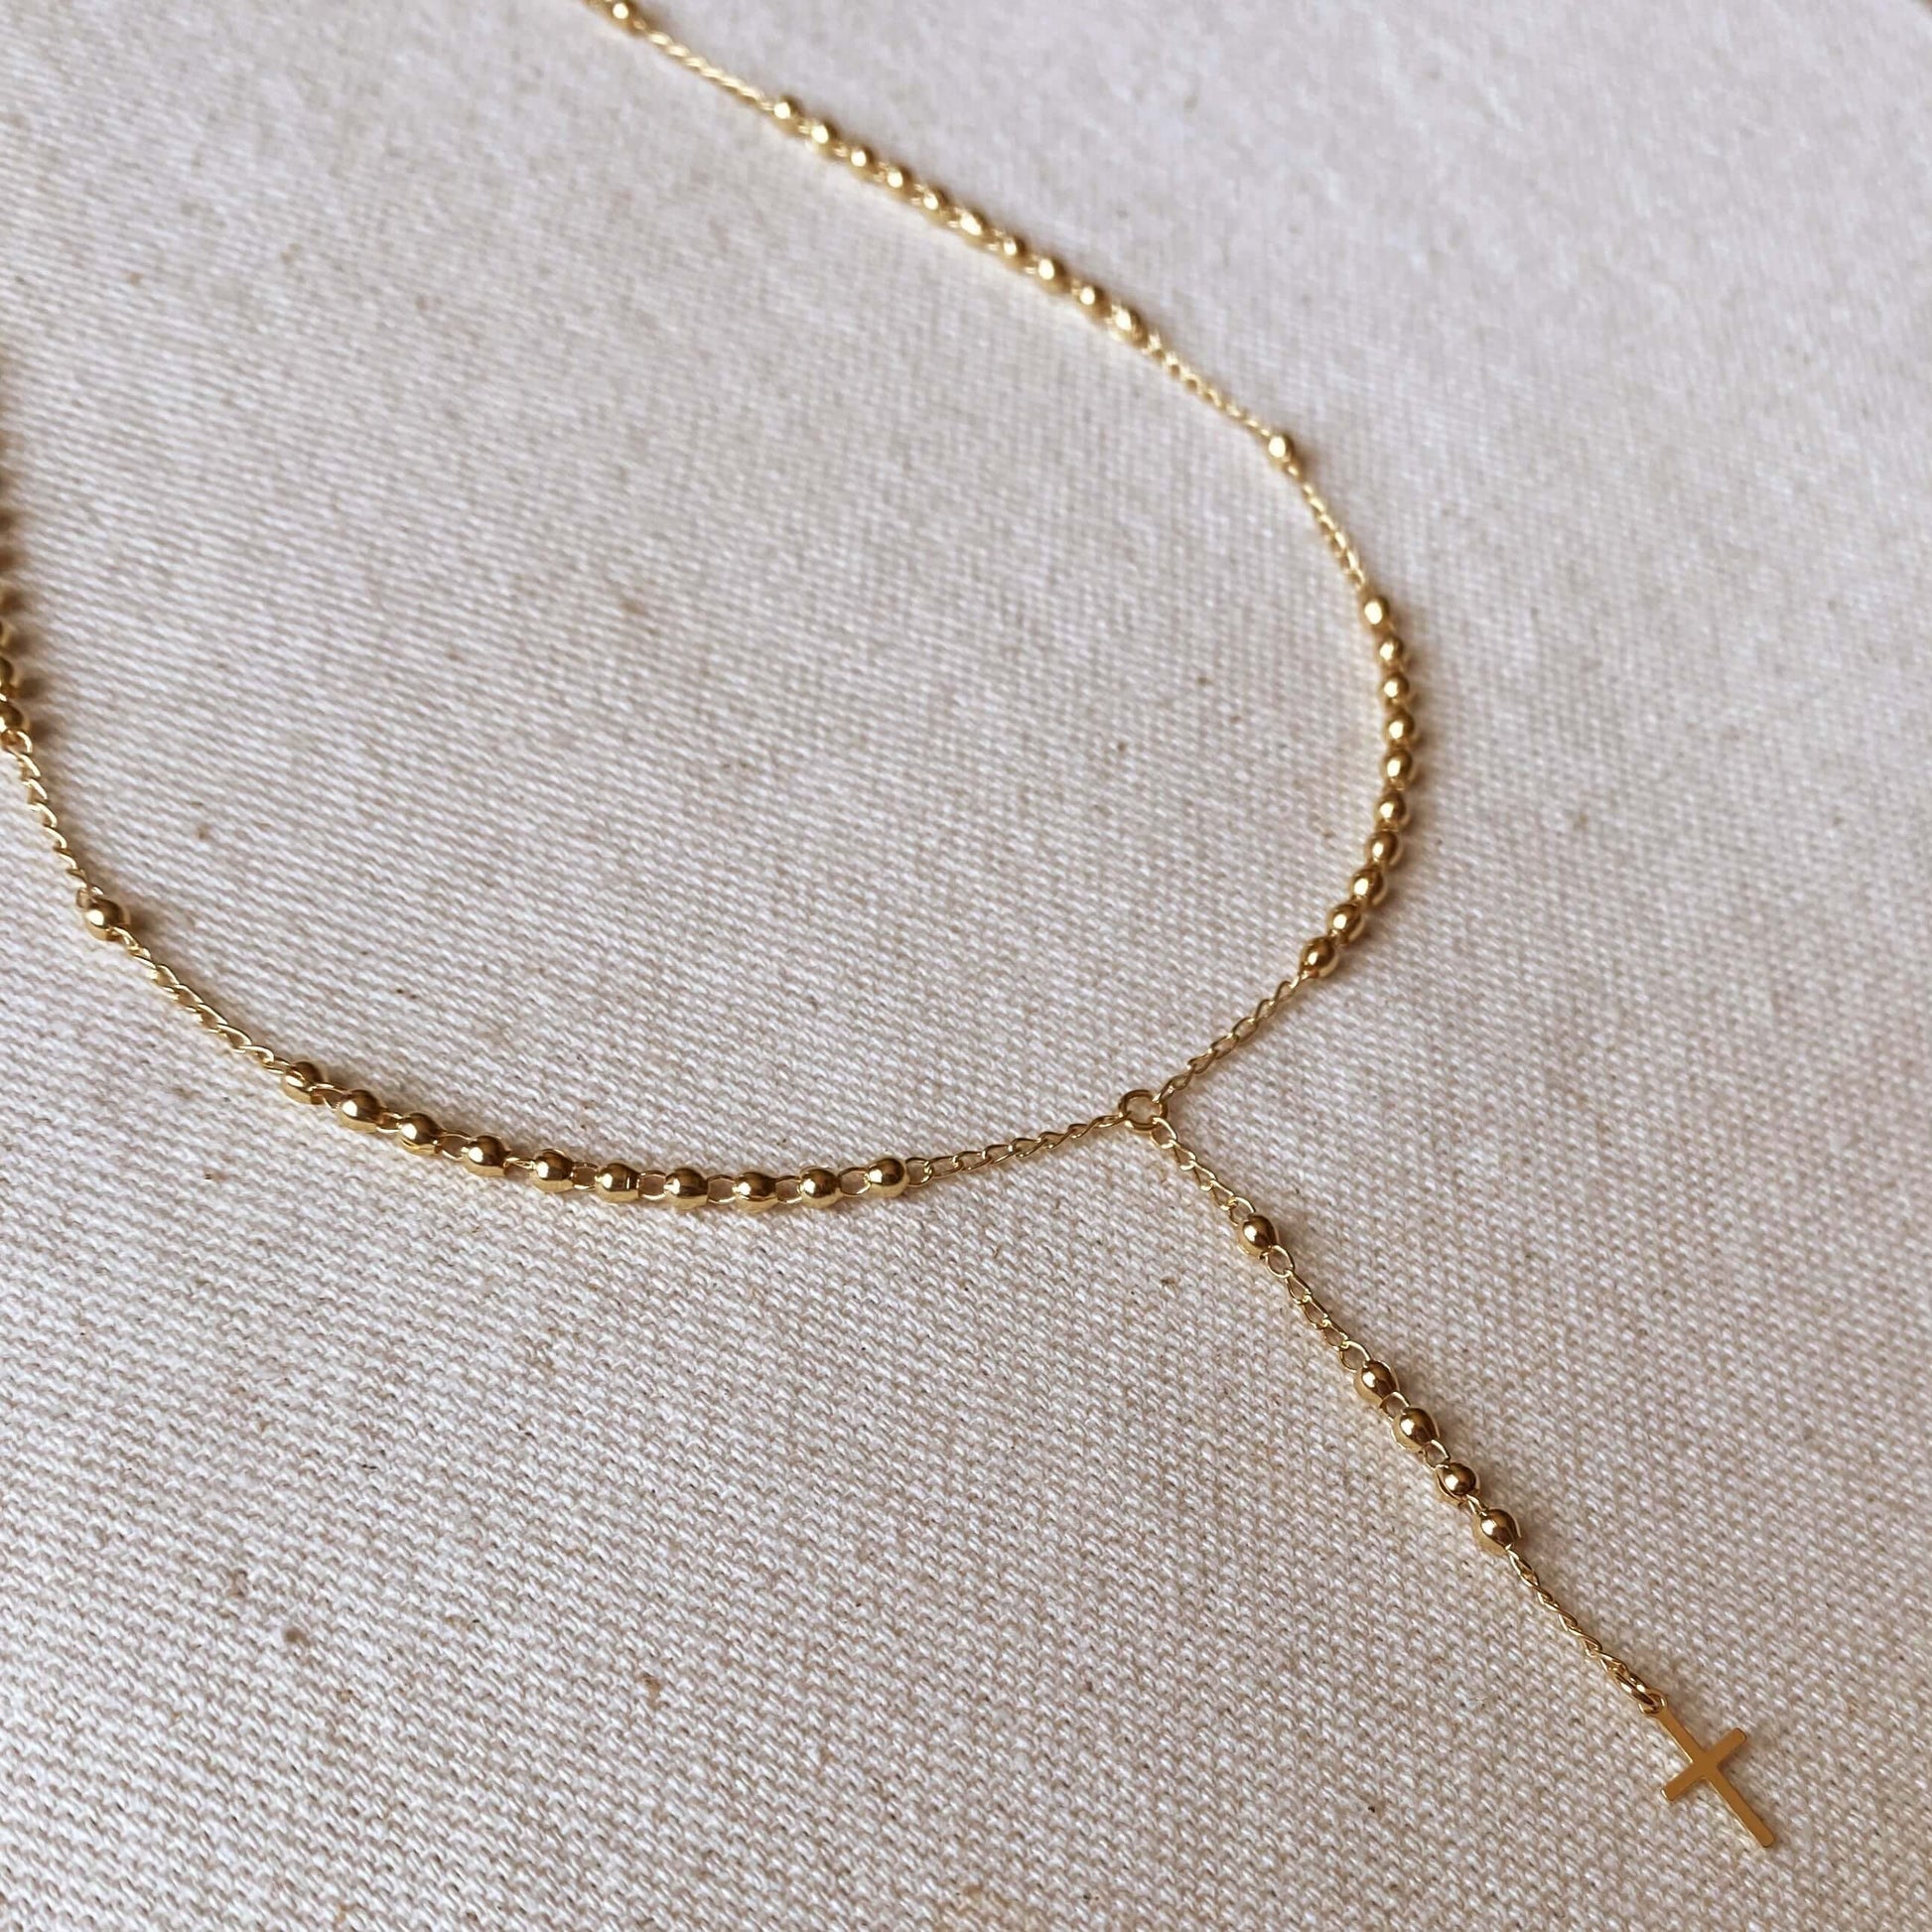 GoldFi 18k Gold Filled Simple Cross Rosary Necklace